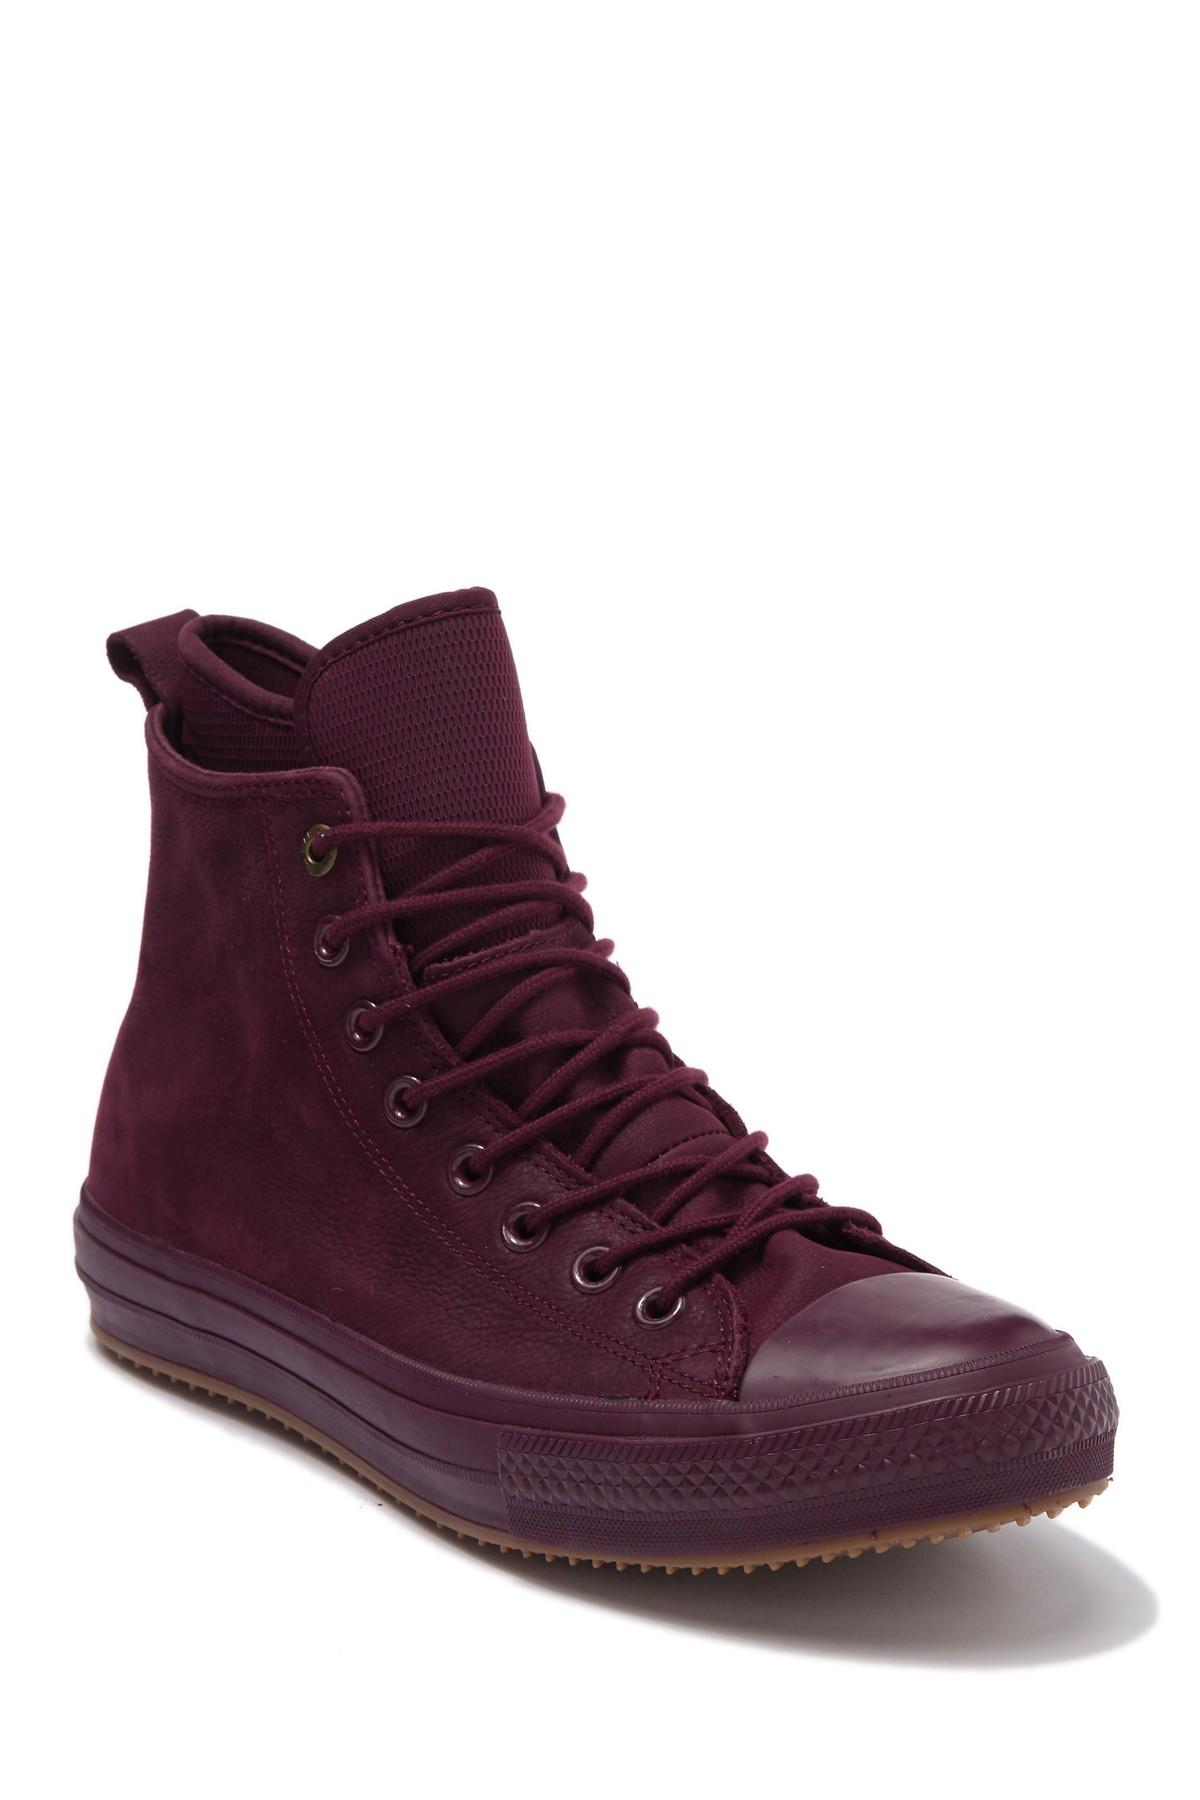 Converse Leather Dark Sangria All Star Wp Sneaker (unisex) for Men | Lyst